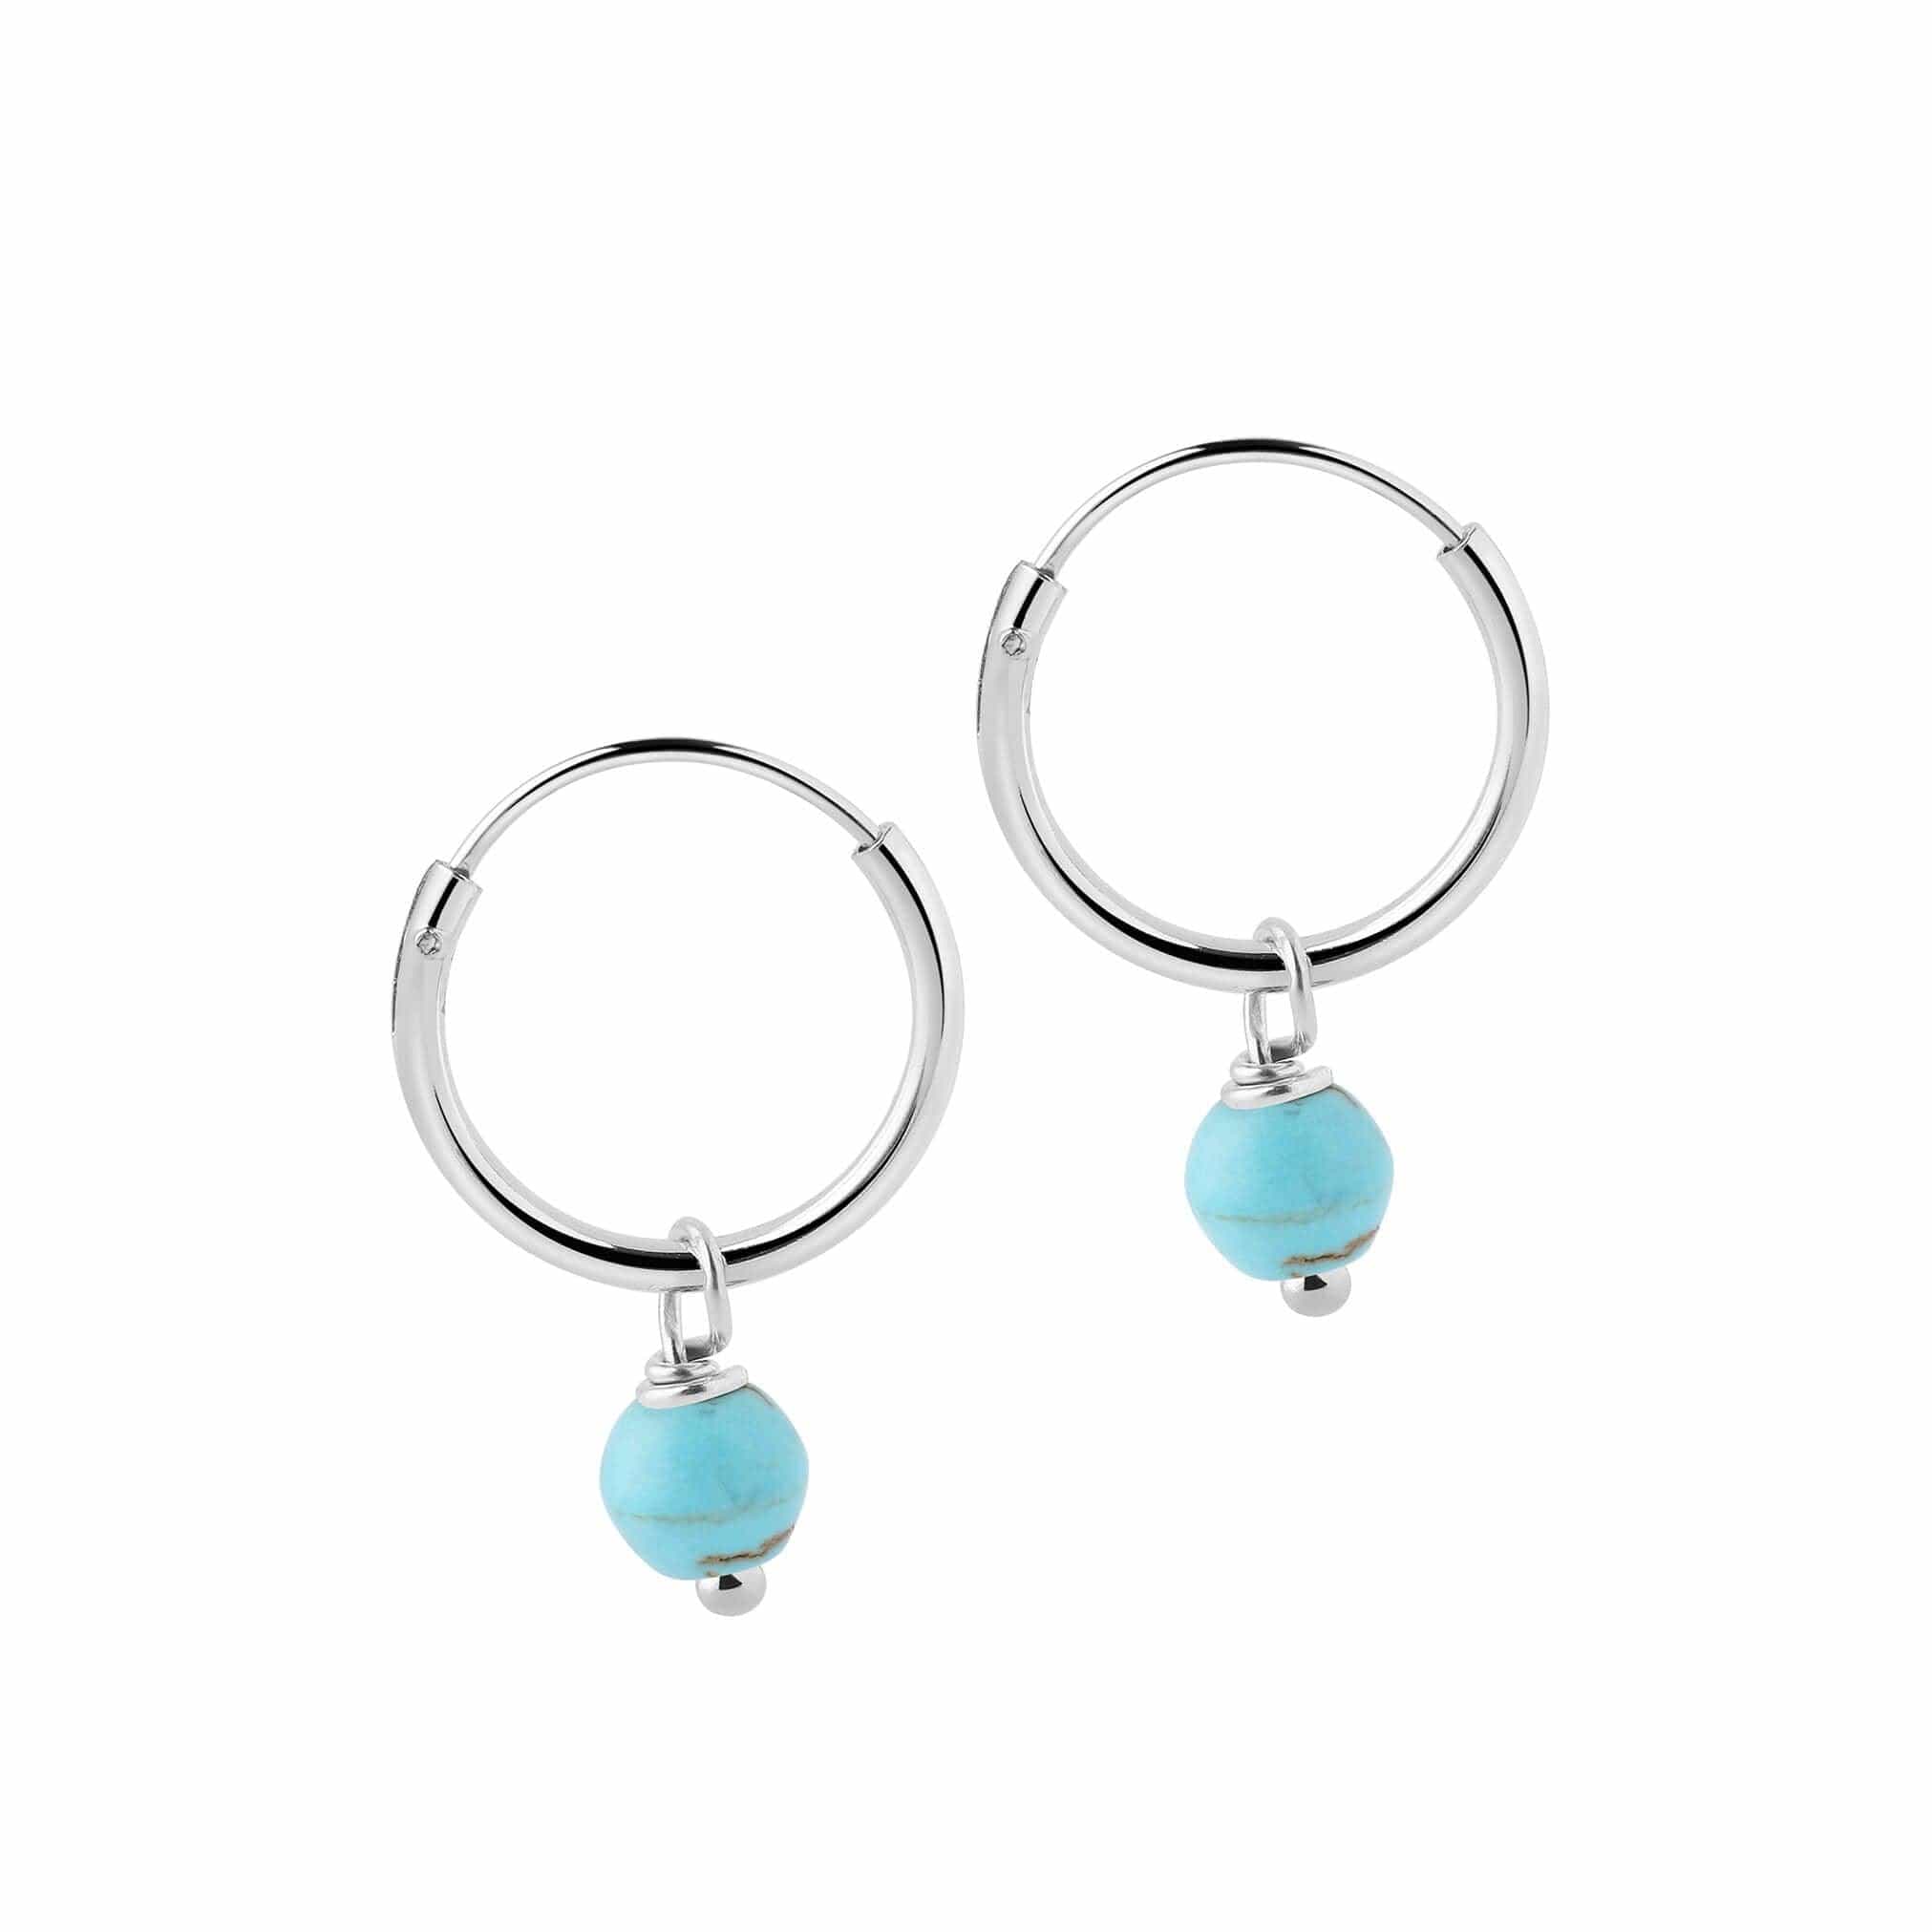 Silver Plated Hoop Earrings with Turquoise Blue Stone